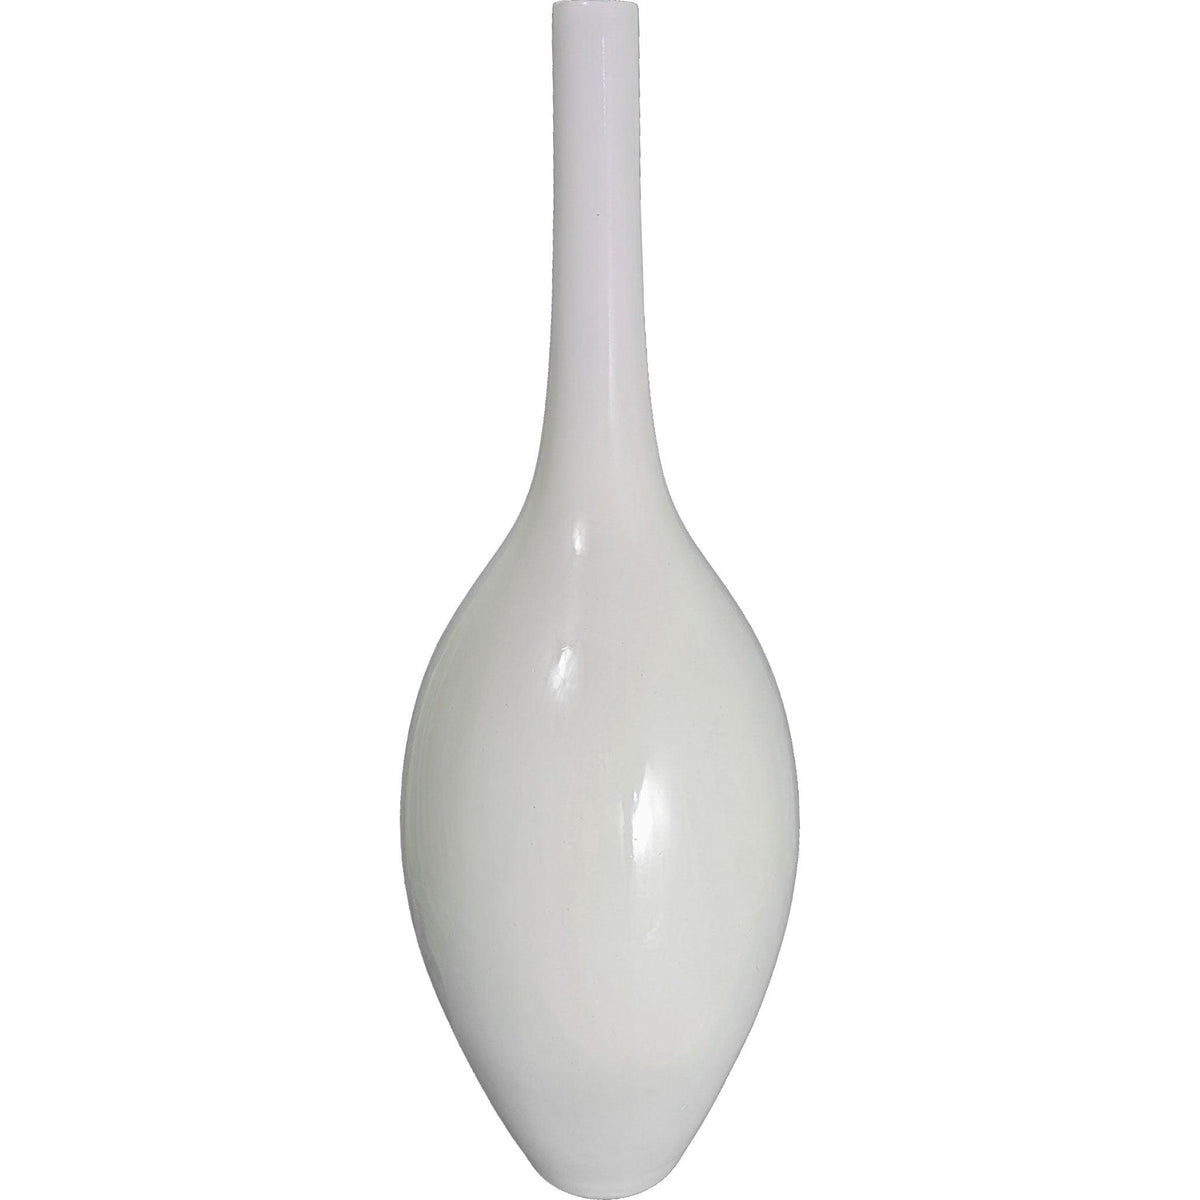 Lee Display's brand new 16in Ceramic Vase comes in a high gloss white finish on sale at leedisplay.com